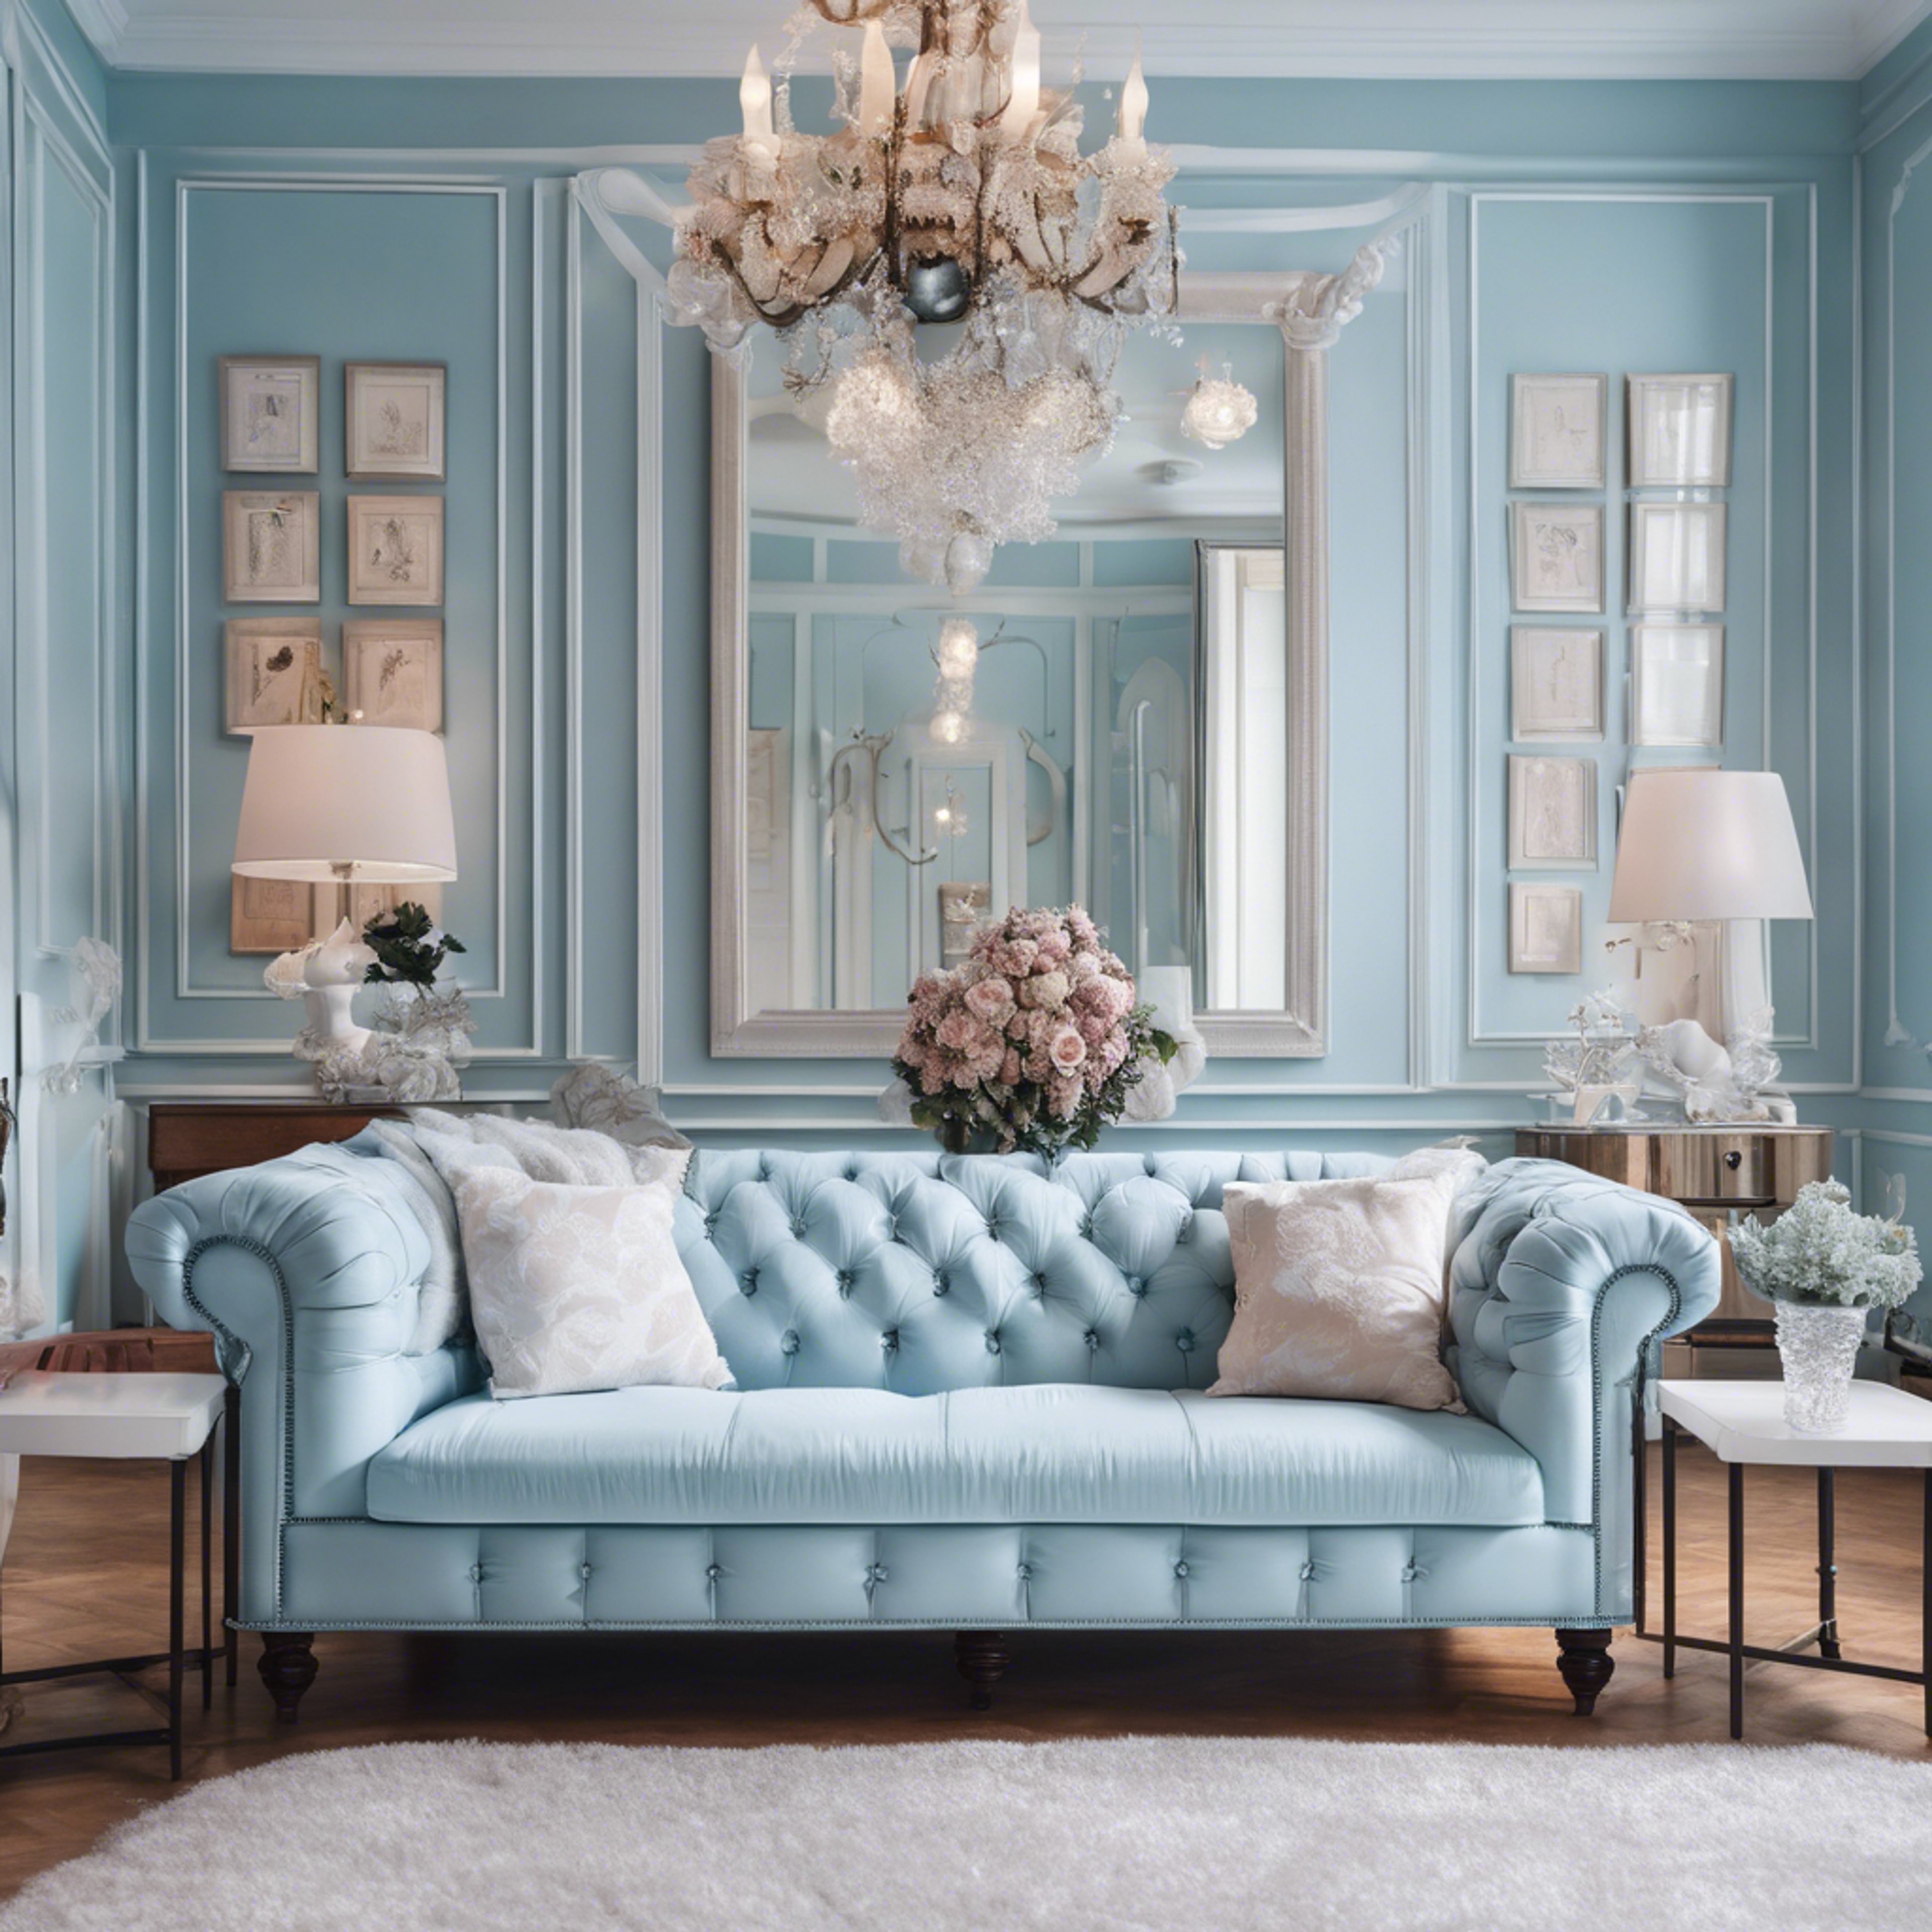 A preppy styled room with pastel blue wallpaper, Chesterfield sofa, and white French style furniture.”壁紙[3904fac215ba4f1eaa62]